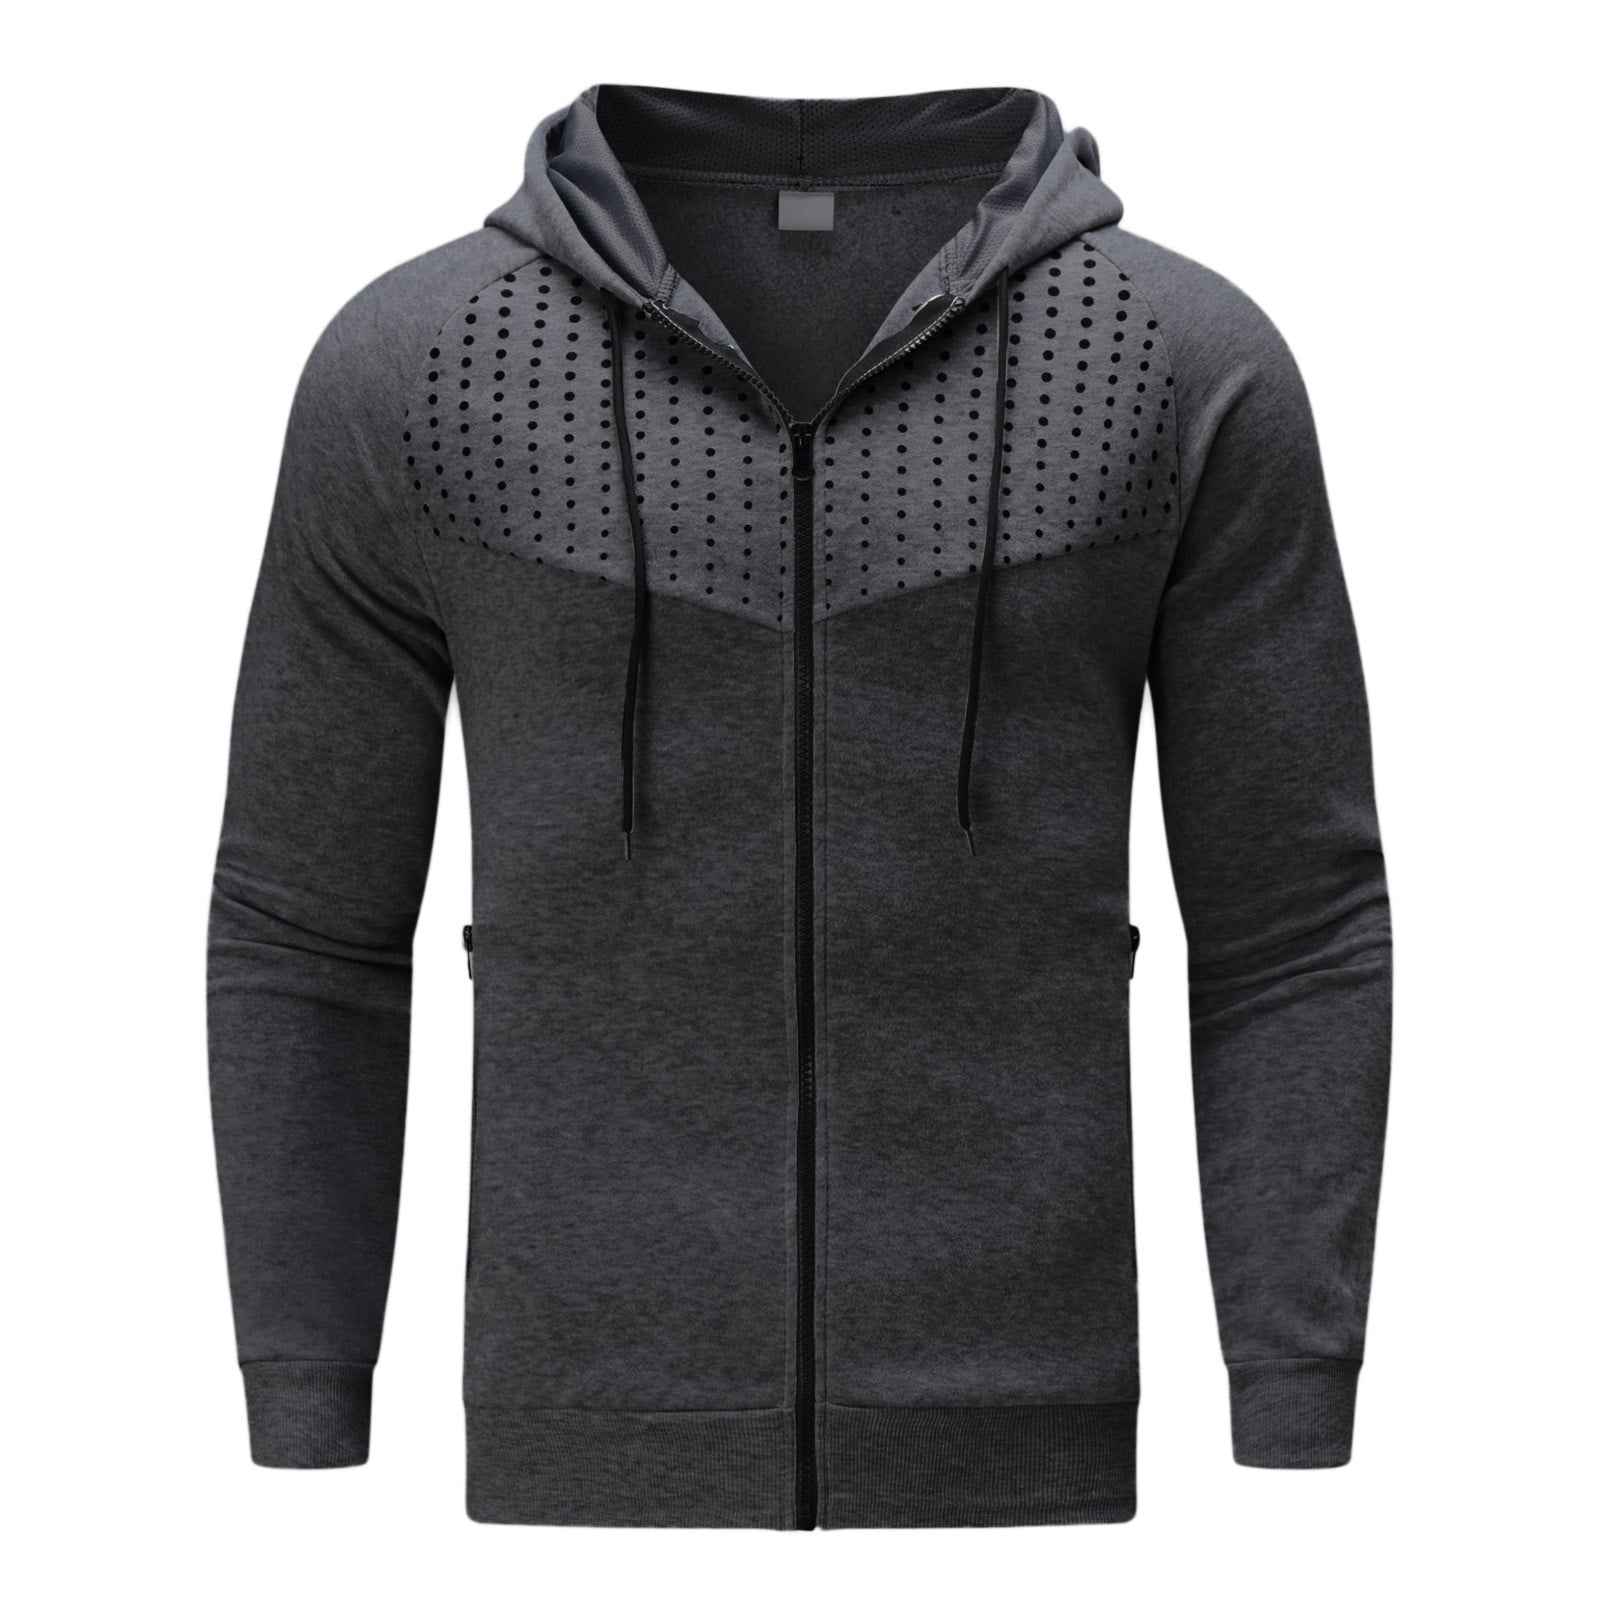 Best Deal for Sweatshirt for Men with Design Polka and Hoodie